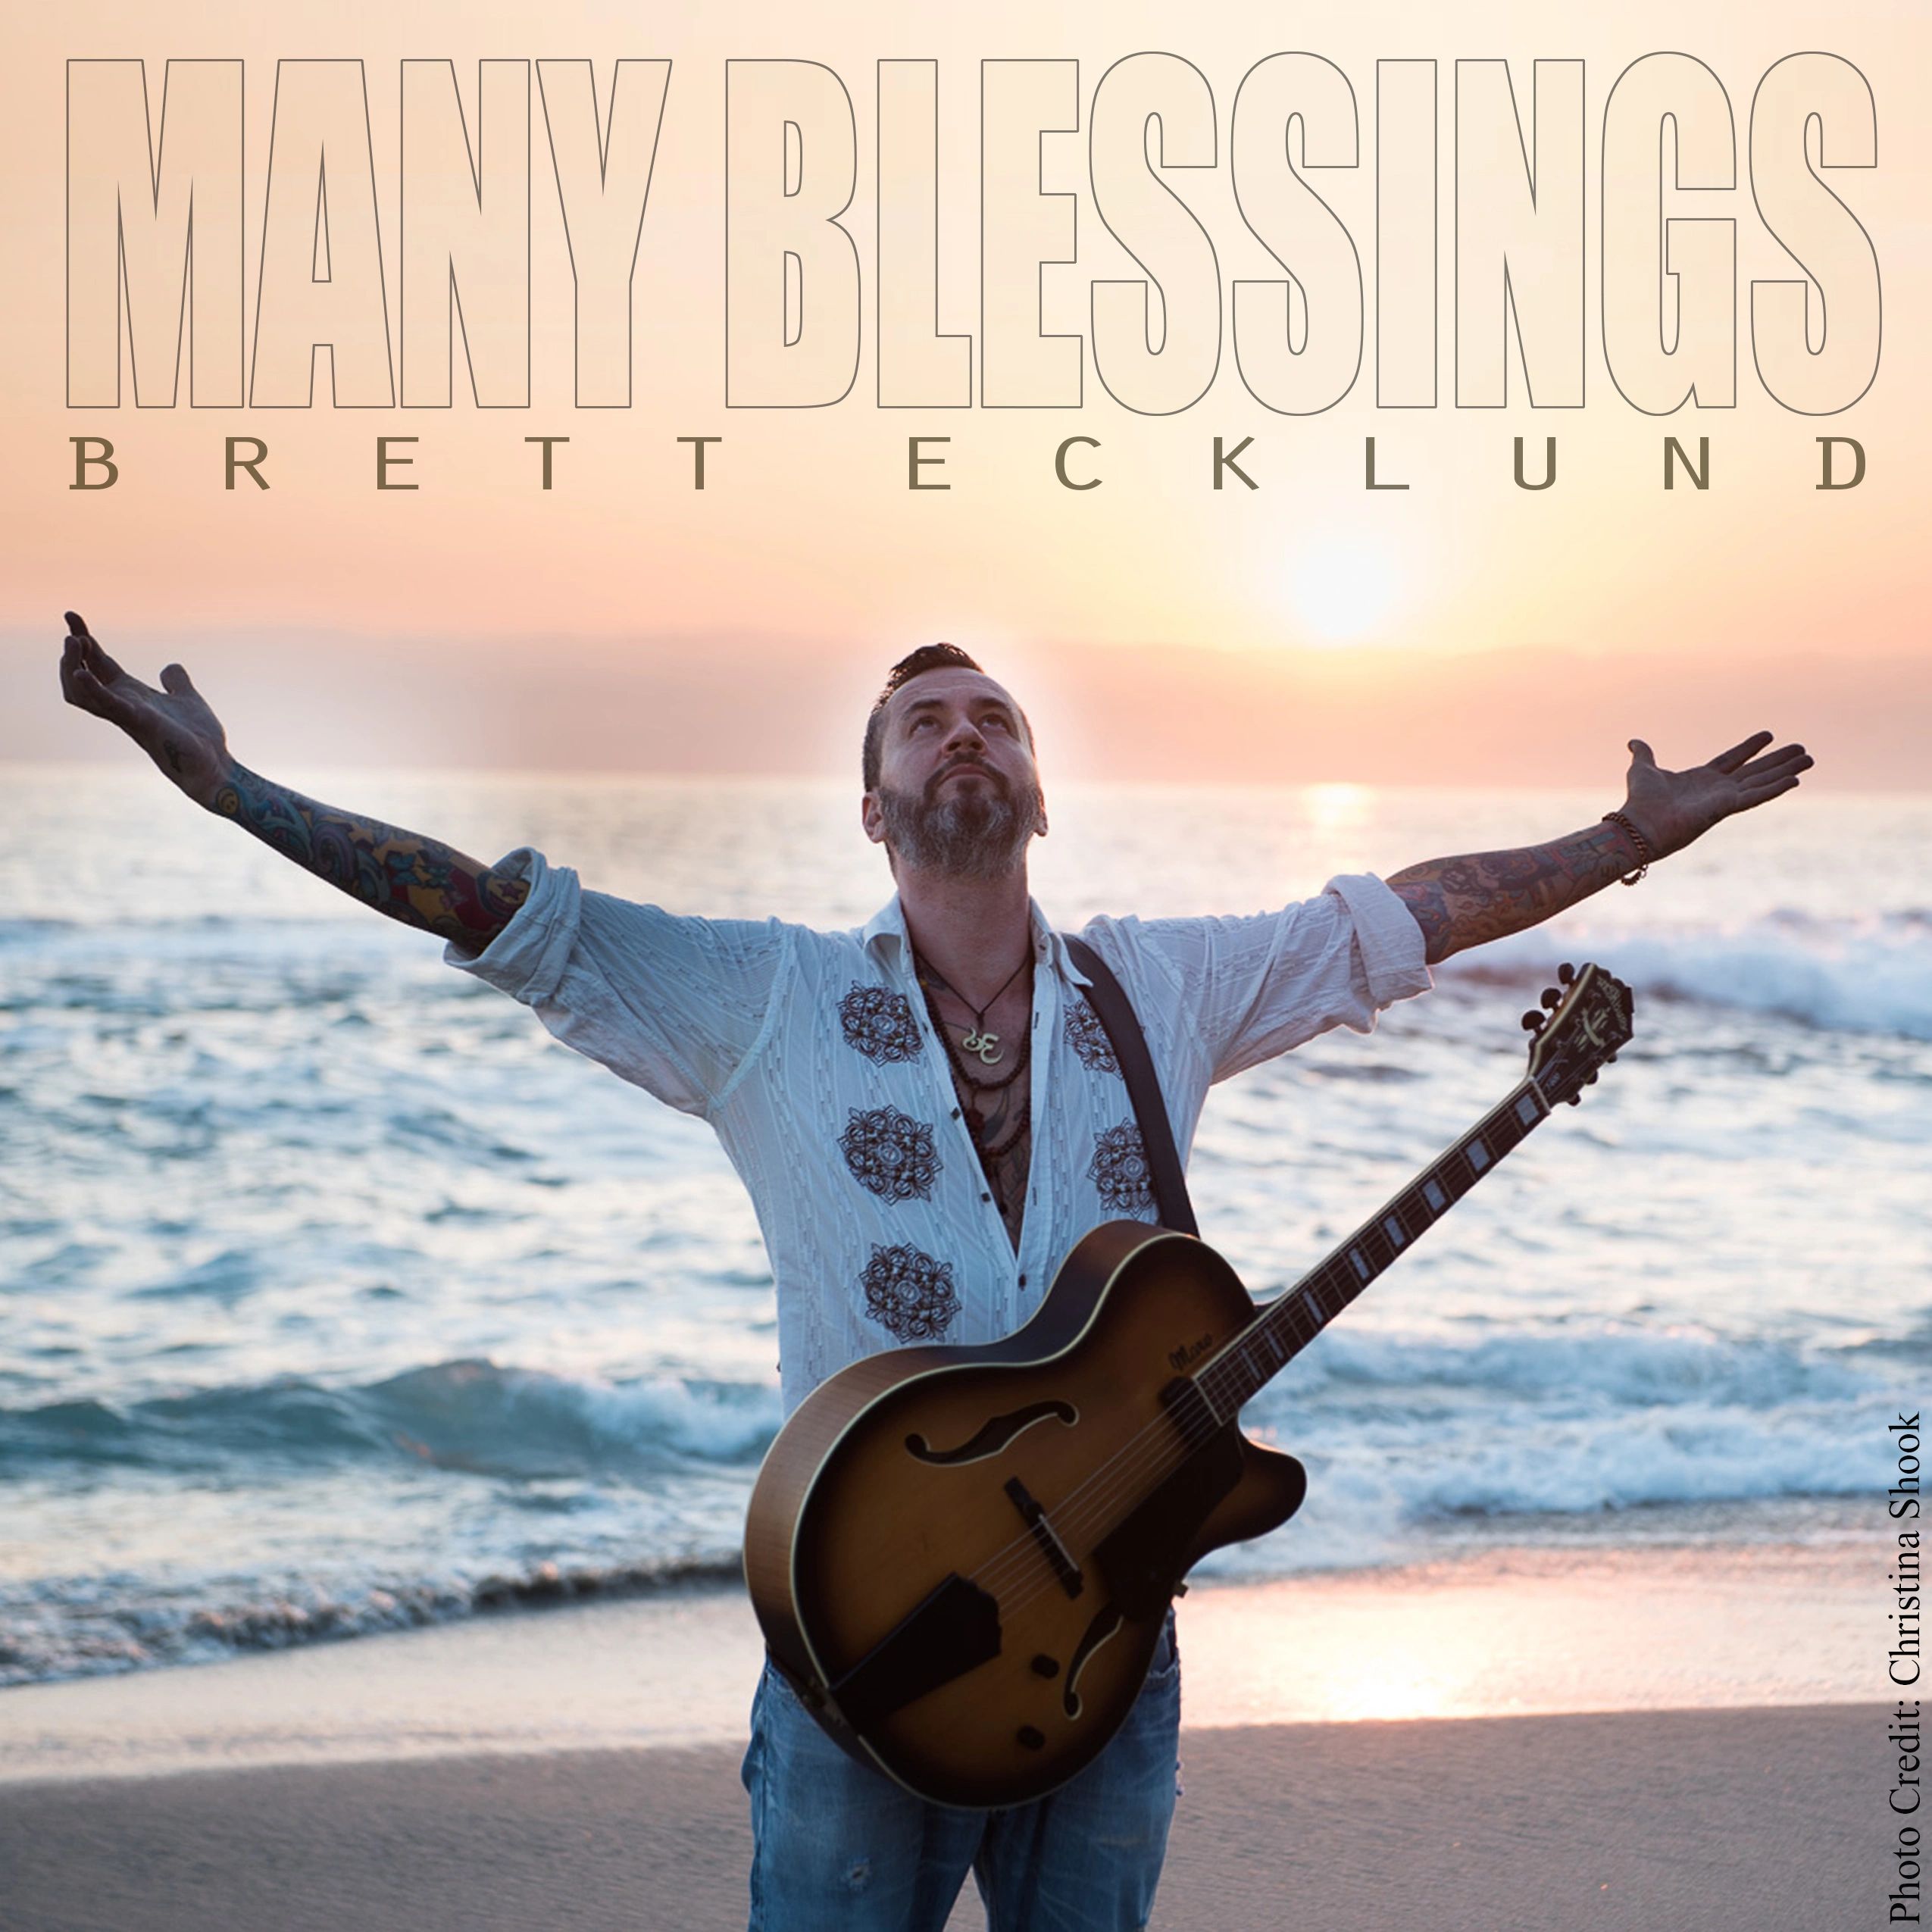 New Single "Many Blessings" Now Available Worldwide!